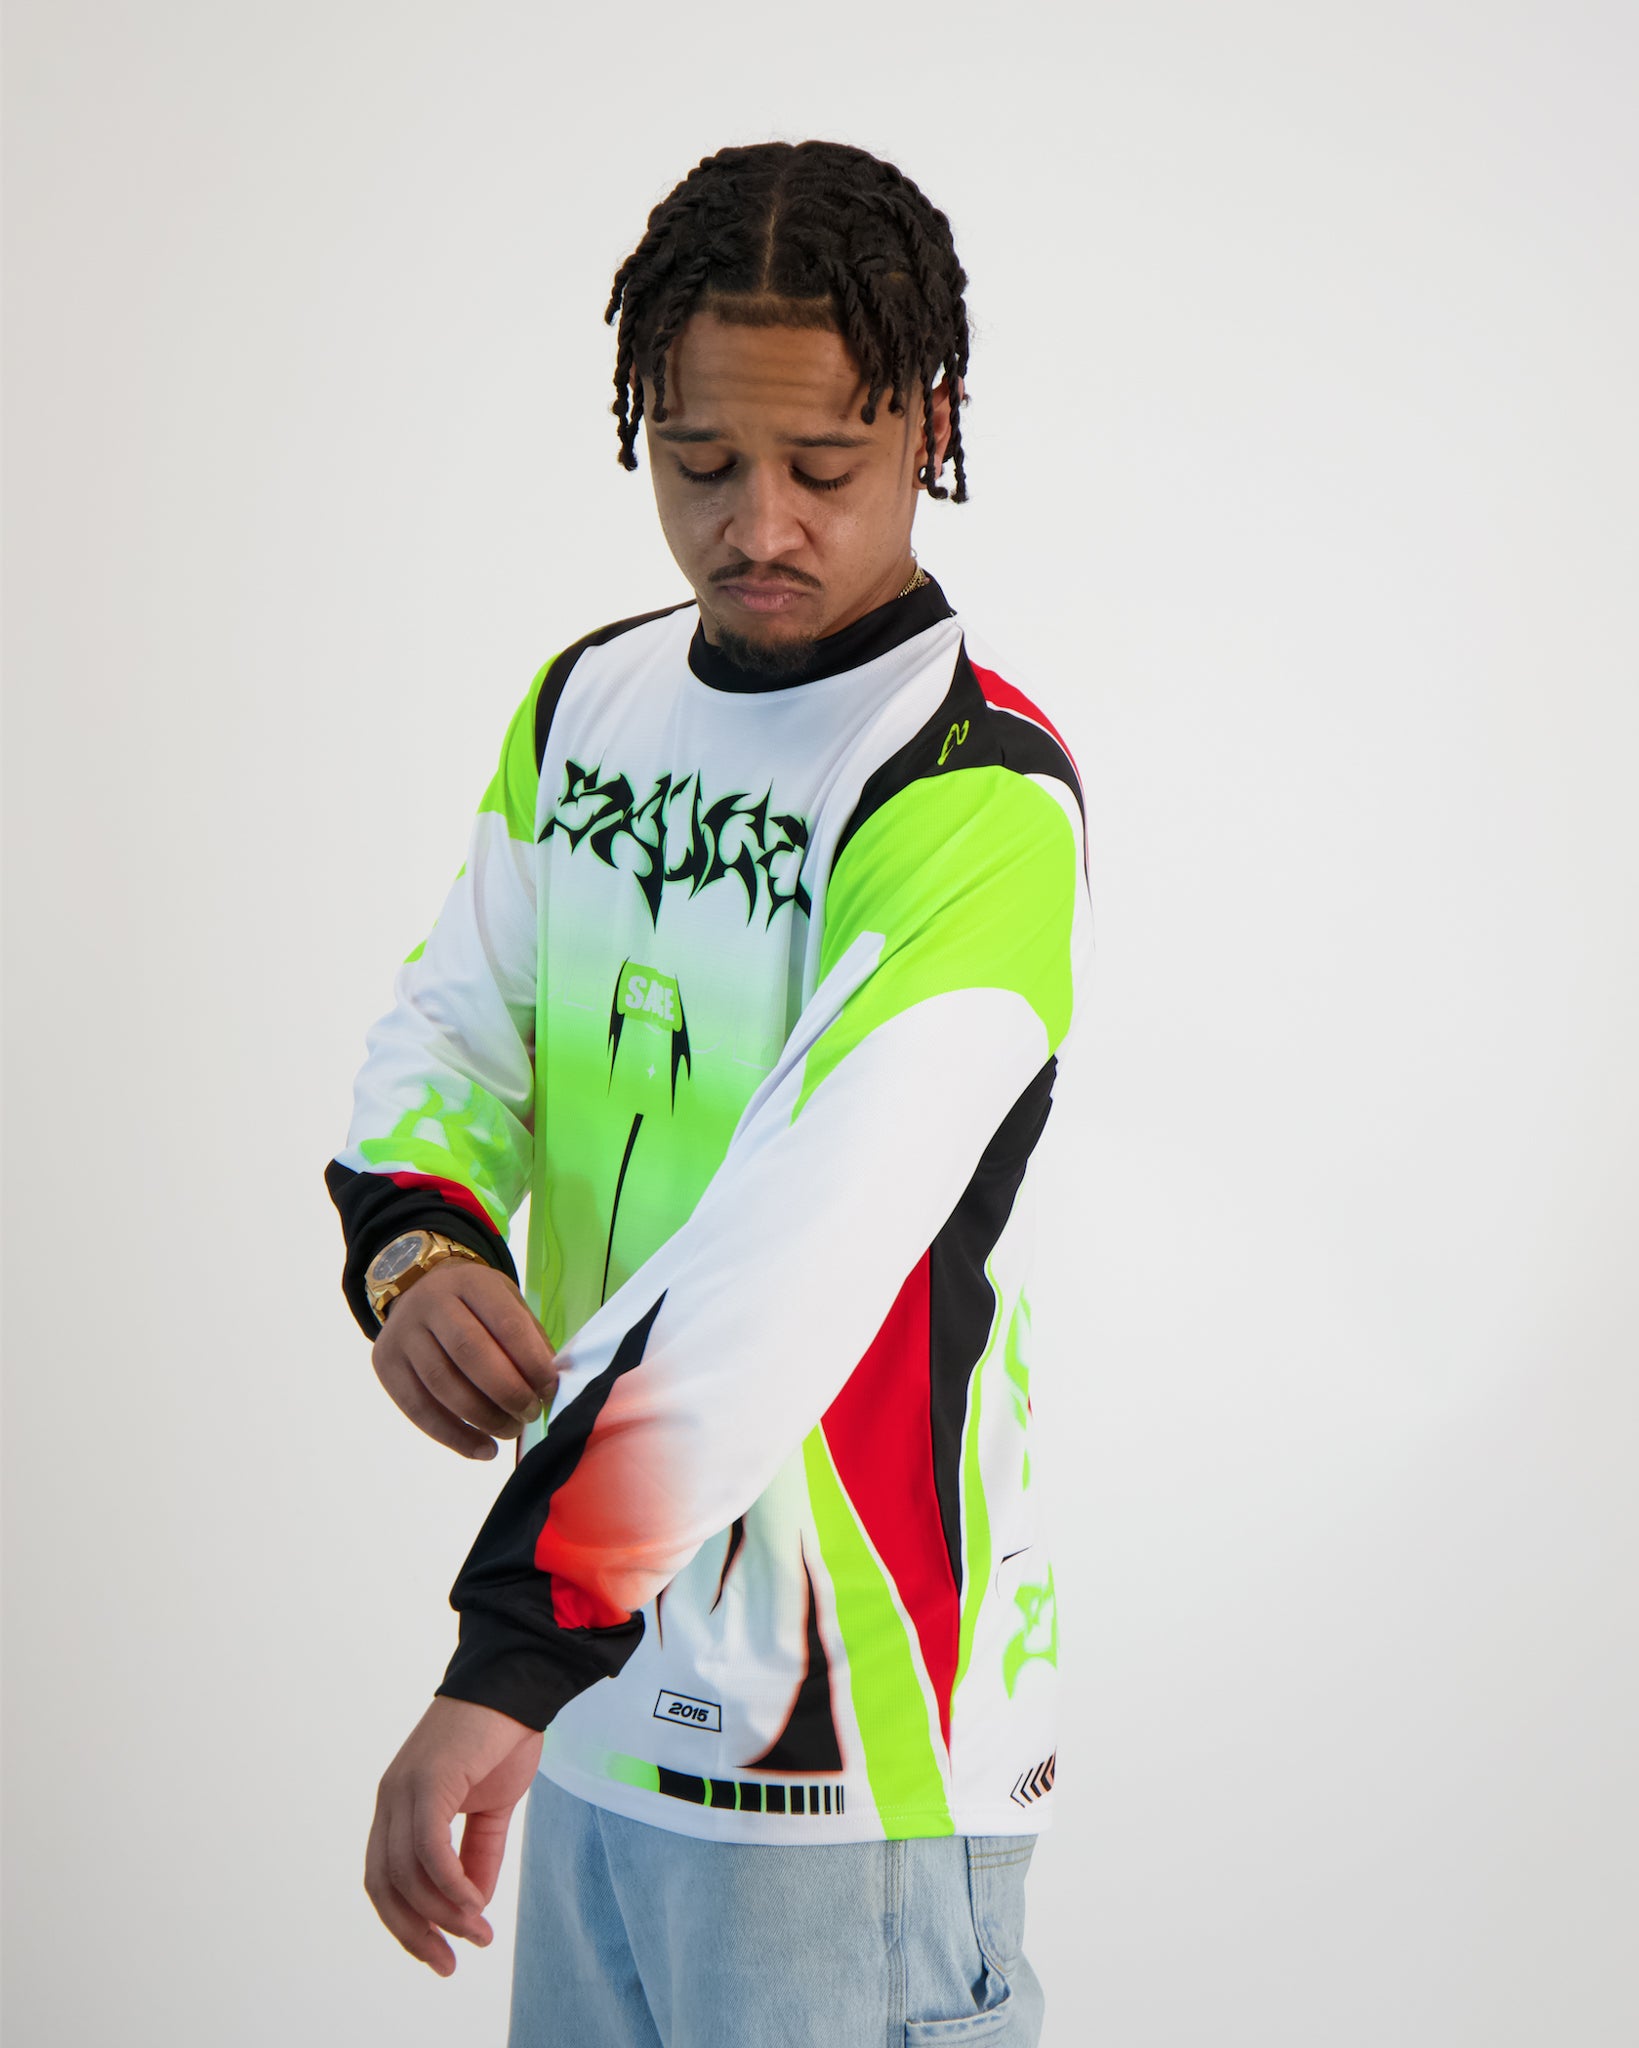 Sauce Model wearing a Longsleeve Shirt in Colour front shot from the side